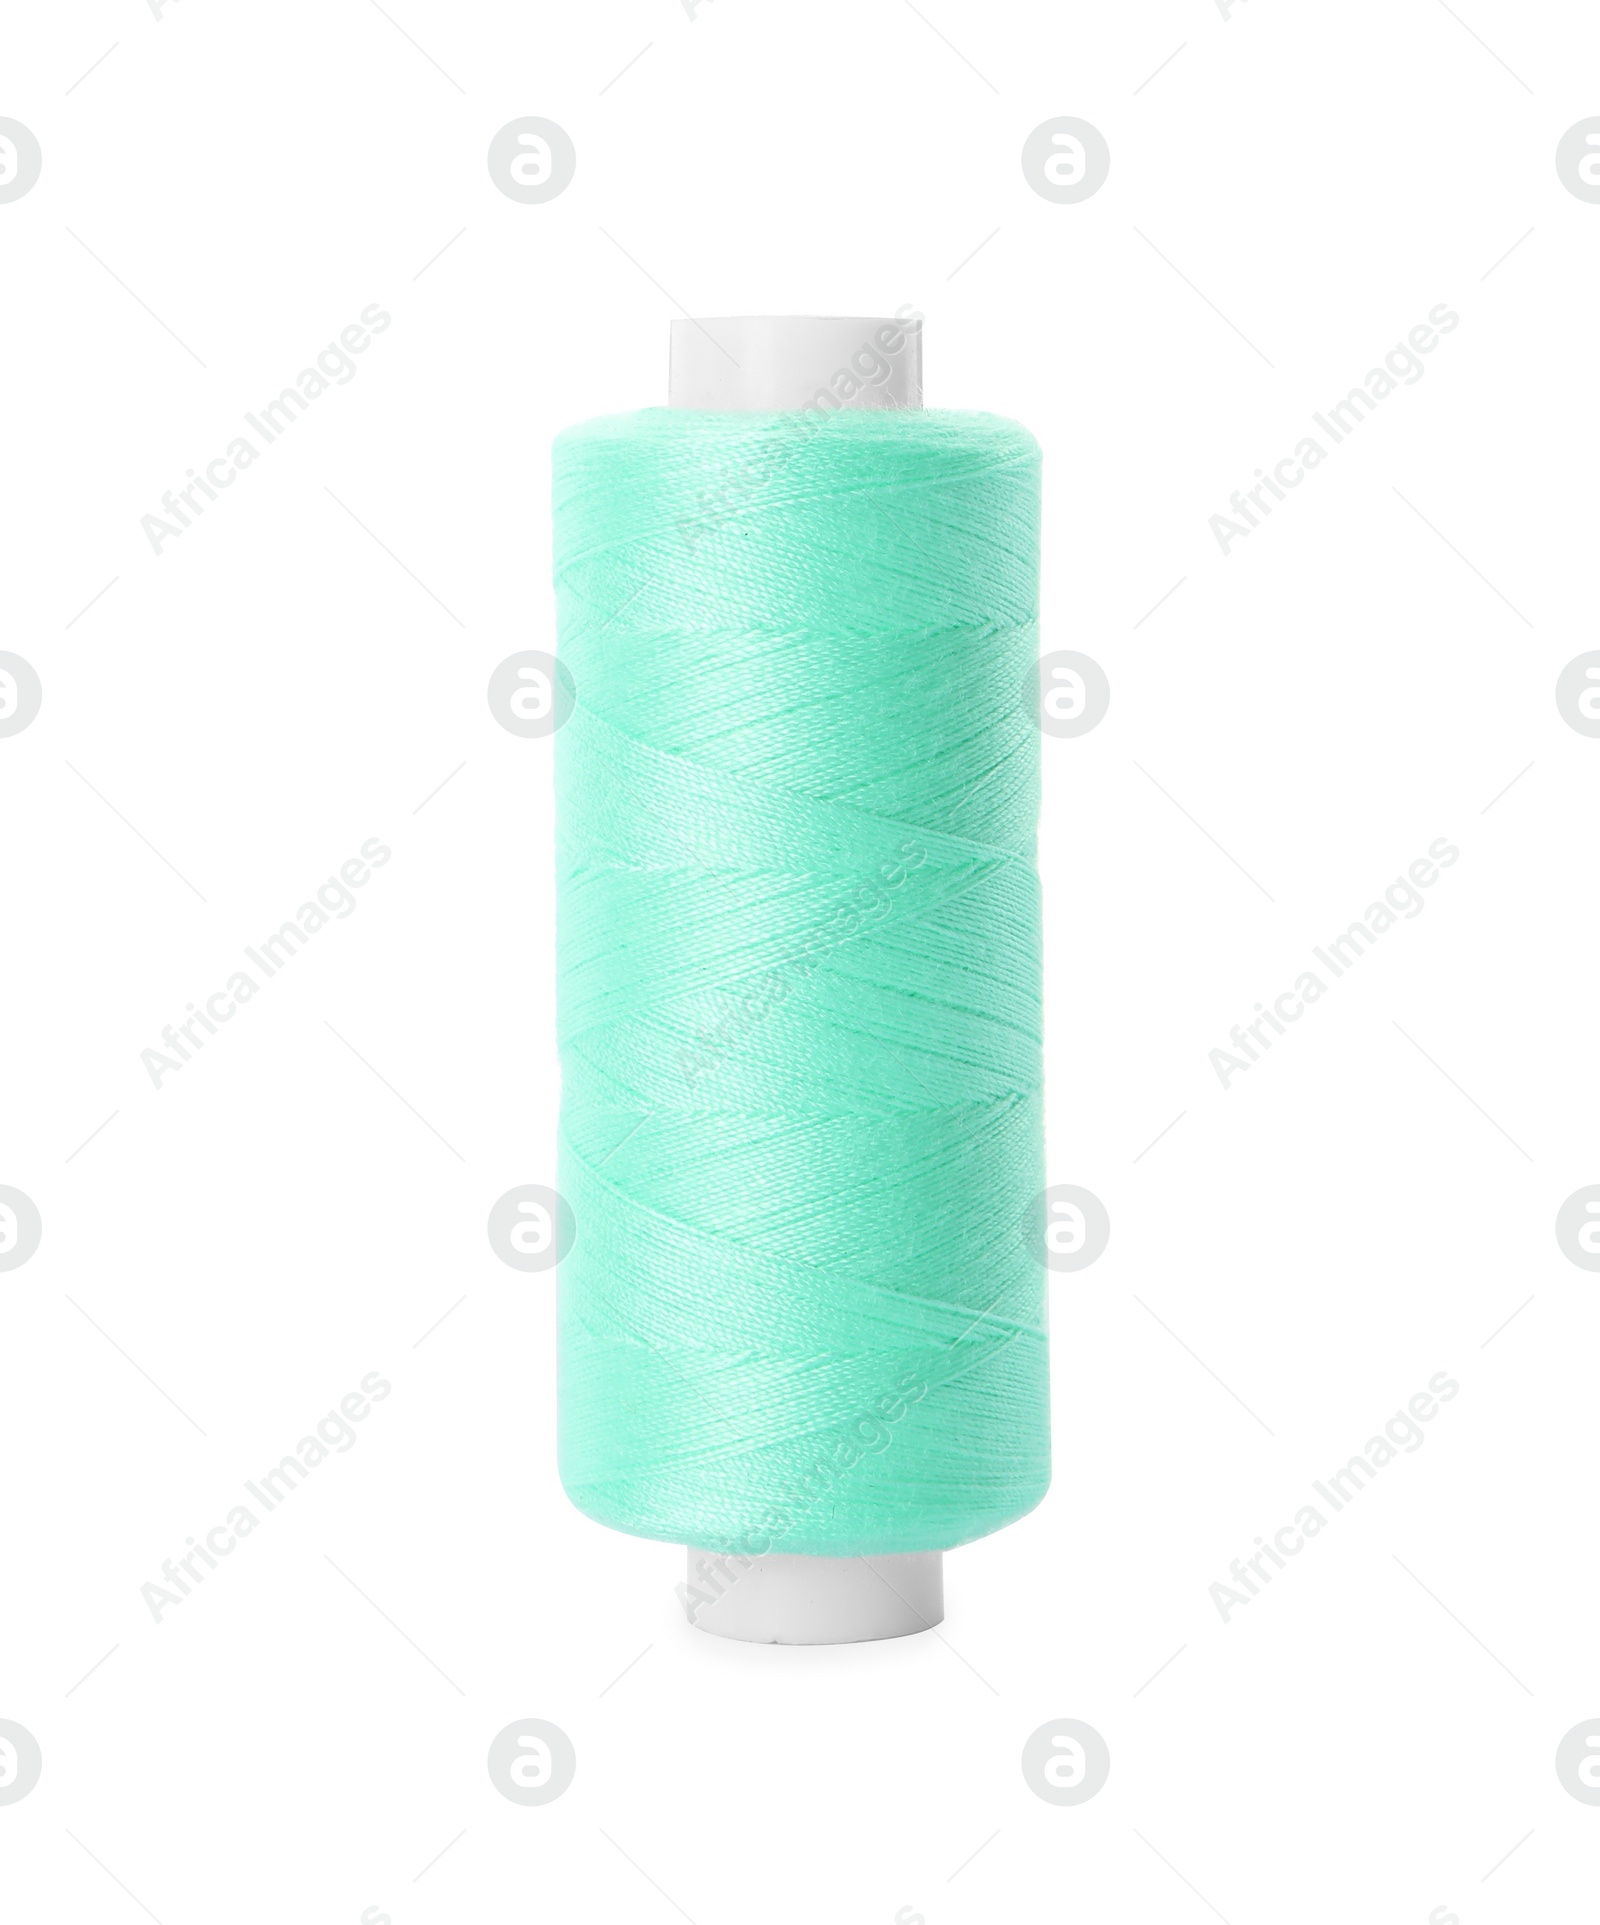 Photo of Spool of turquoise sewing thread isolated on white